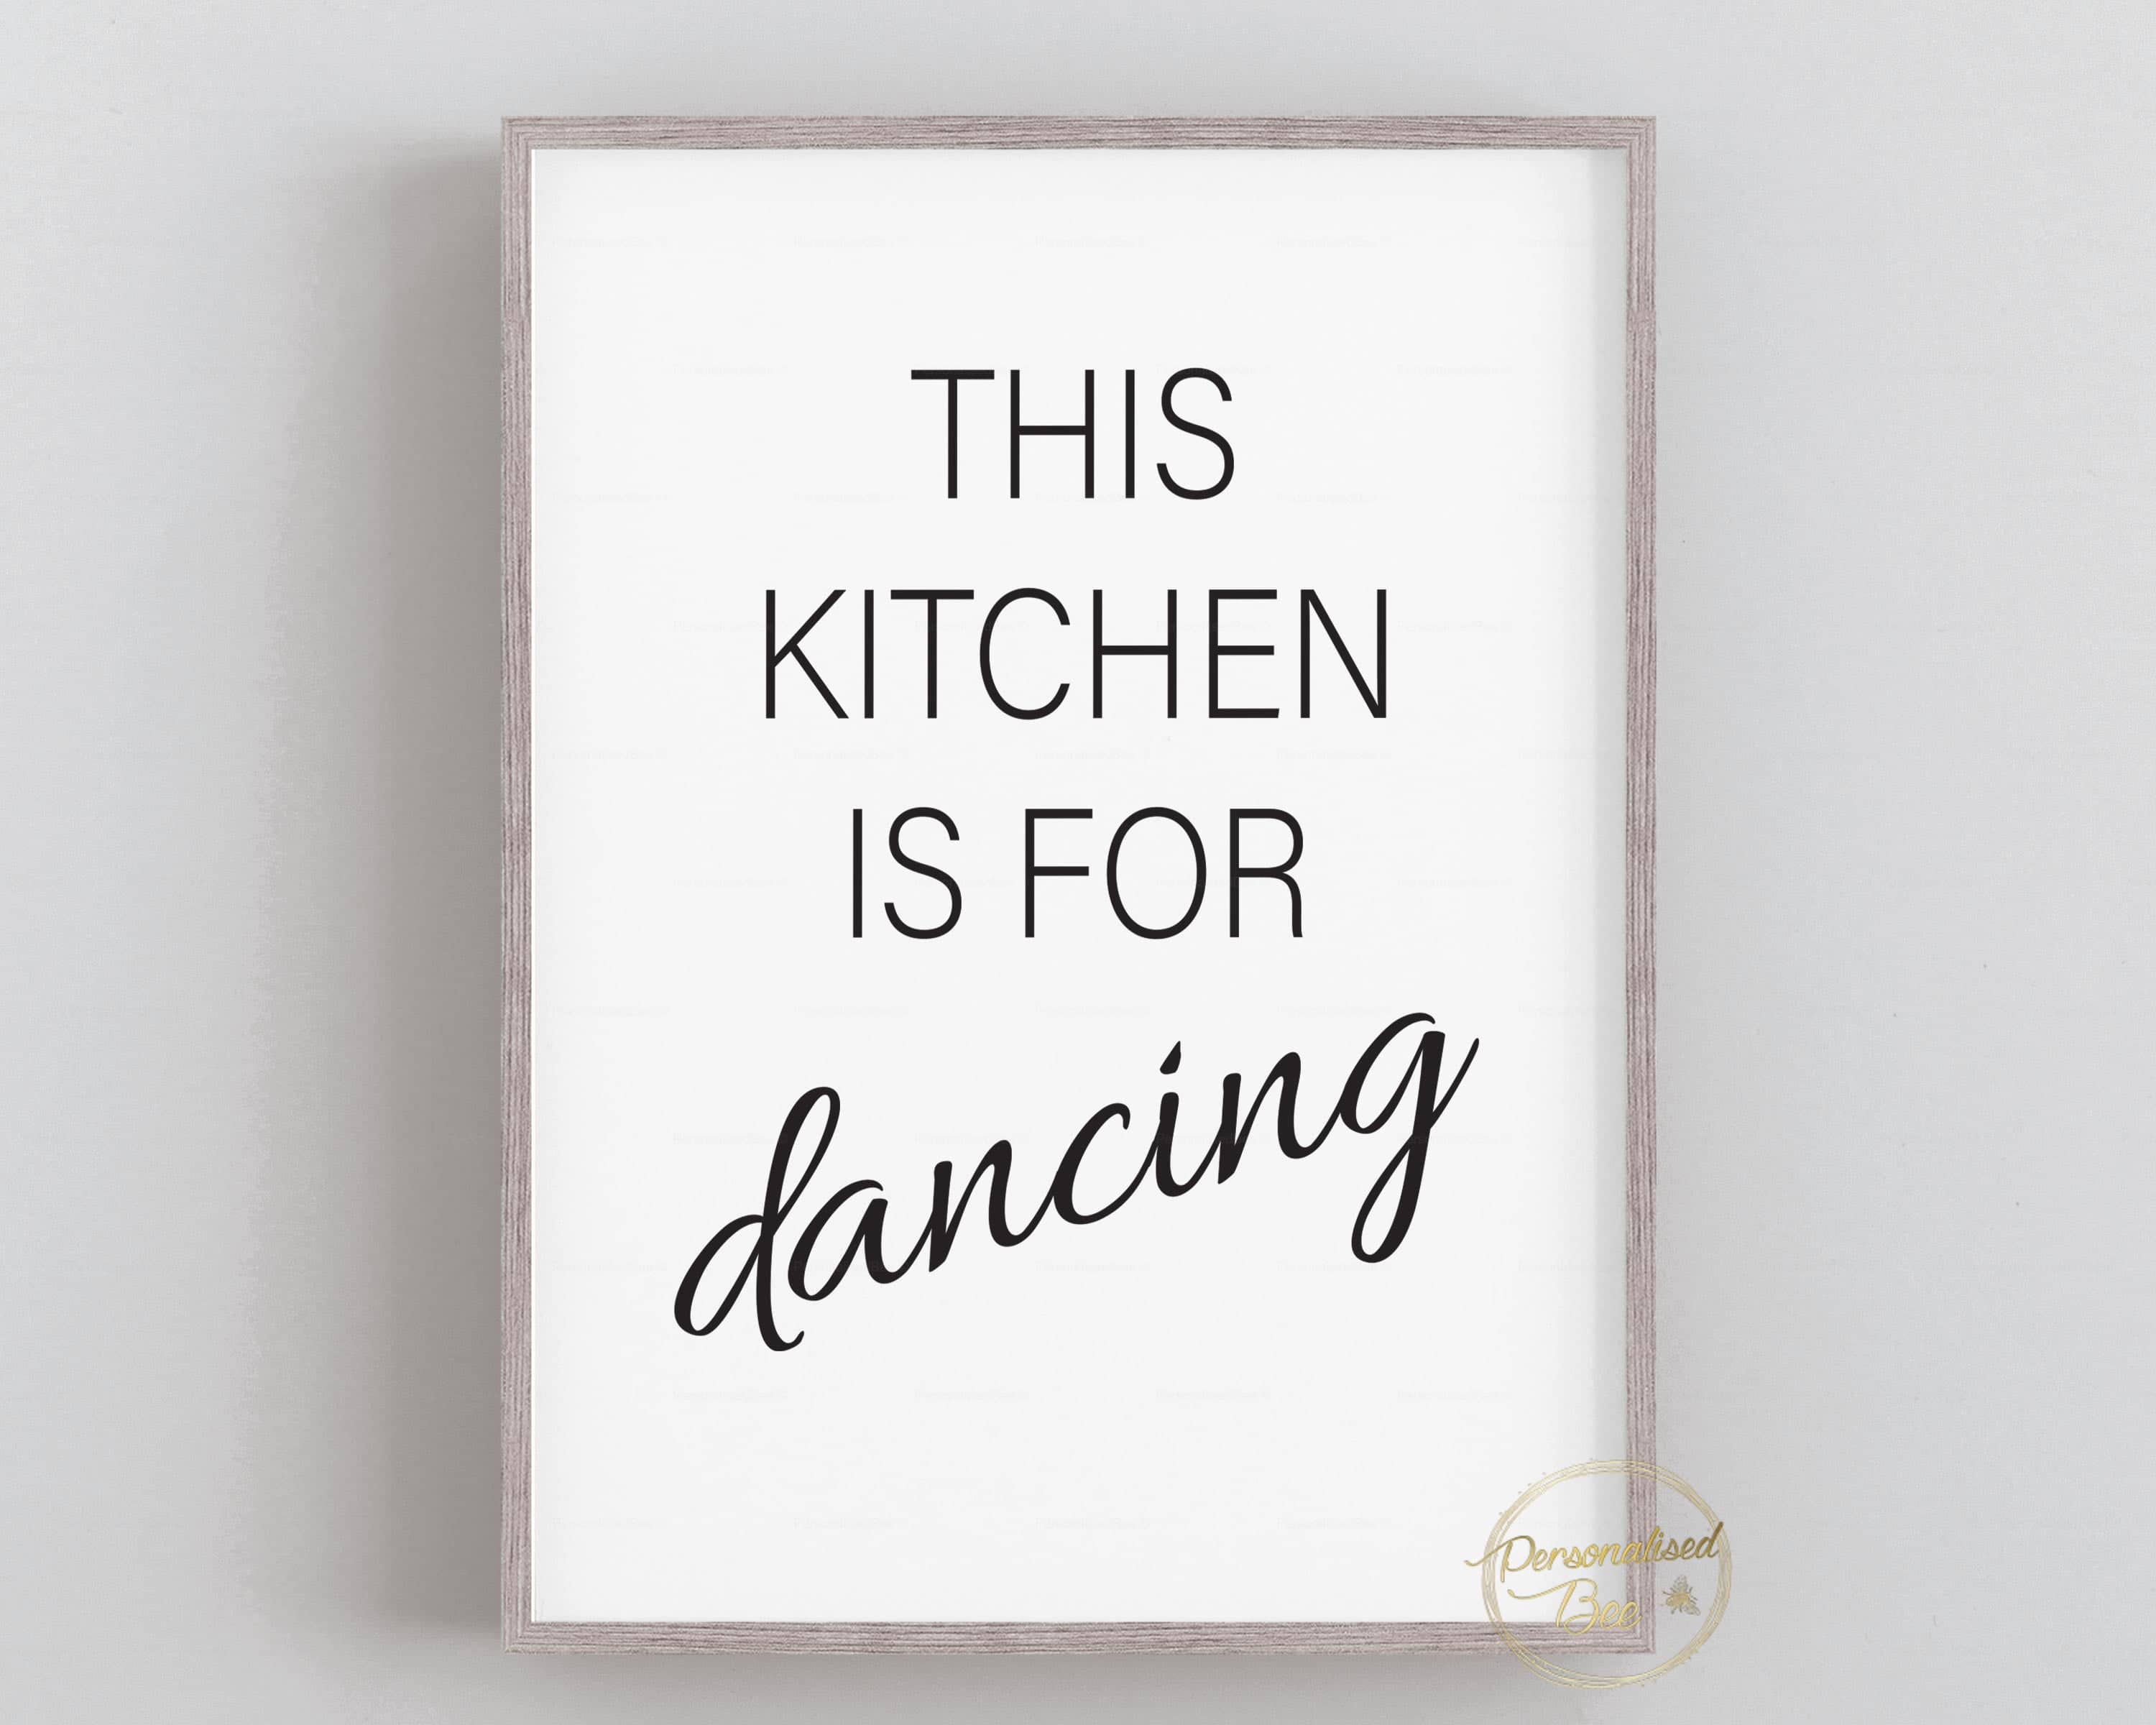 This Kitchen Is For Dancing - Kitchen Wall Art Print.